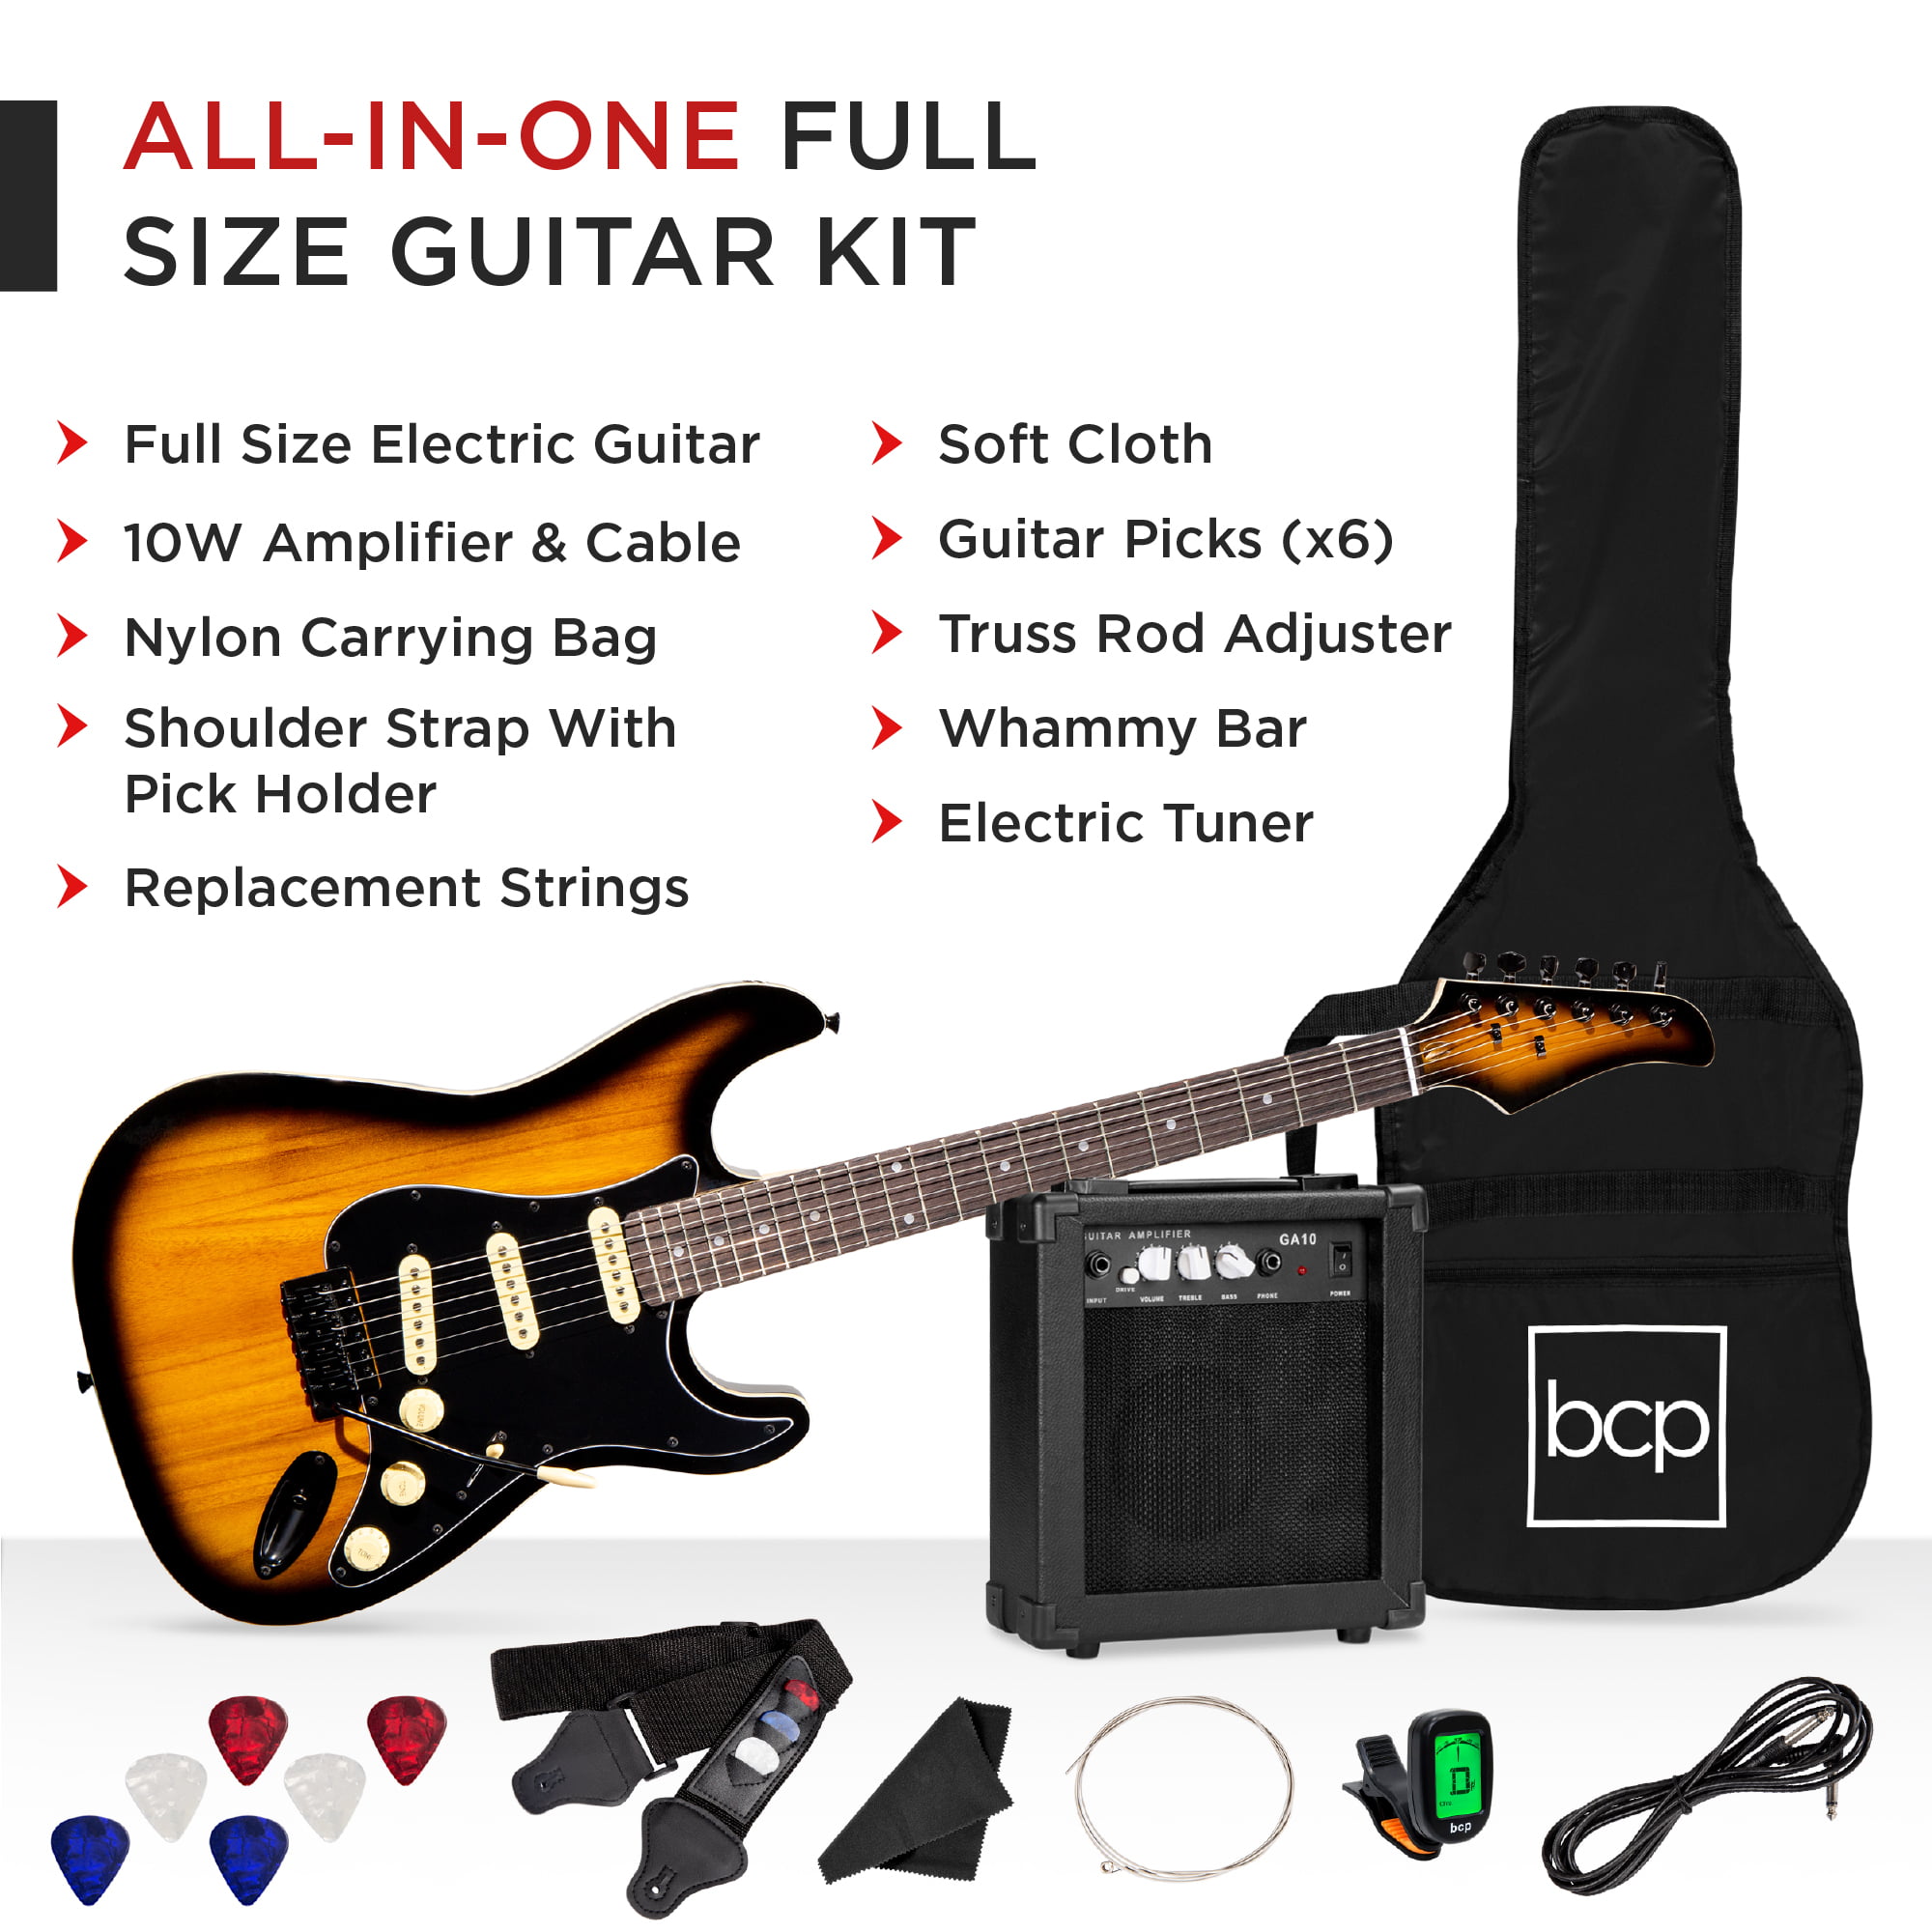 Adaptor NOT Included CB SKY Full-Size 39 Inch Sunbrust Electric Guitar with 5W Amplifier Cable and Guitar Pick Extra Strings